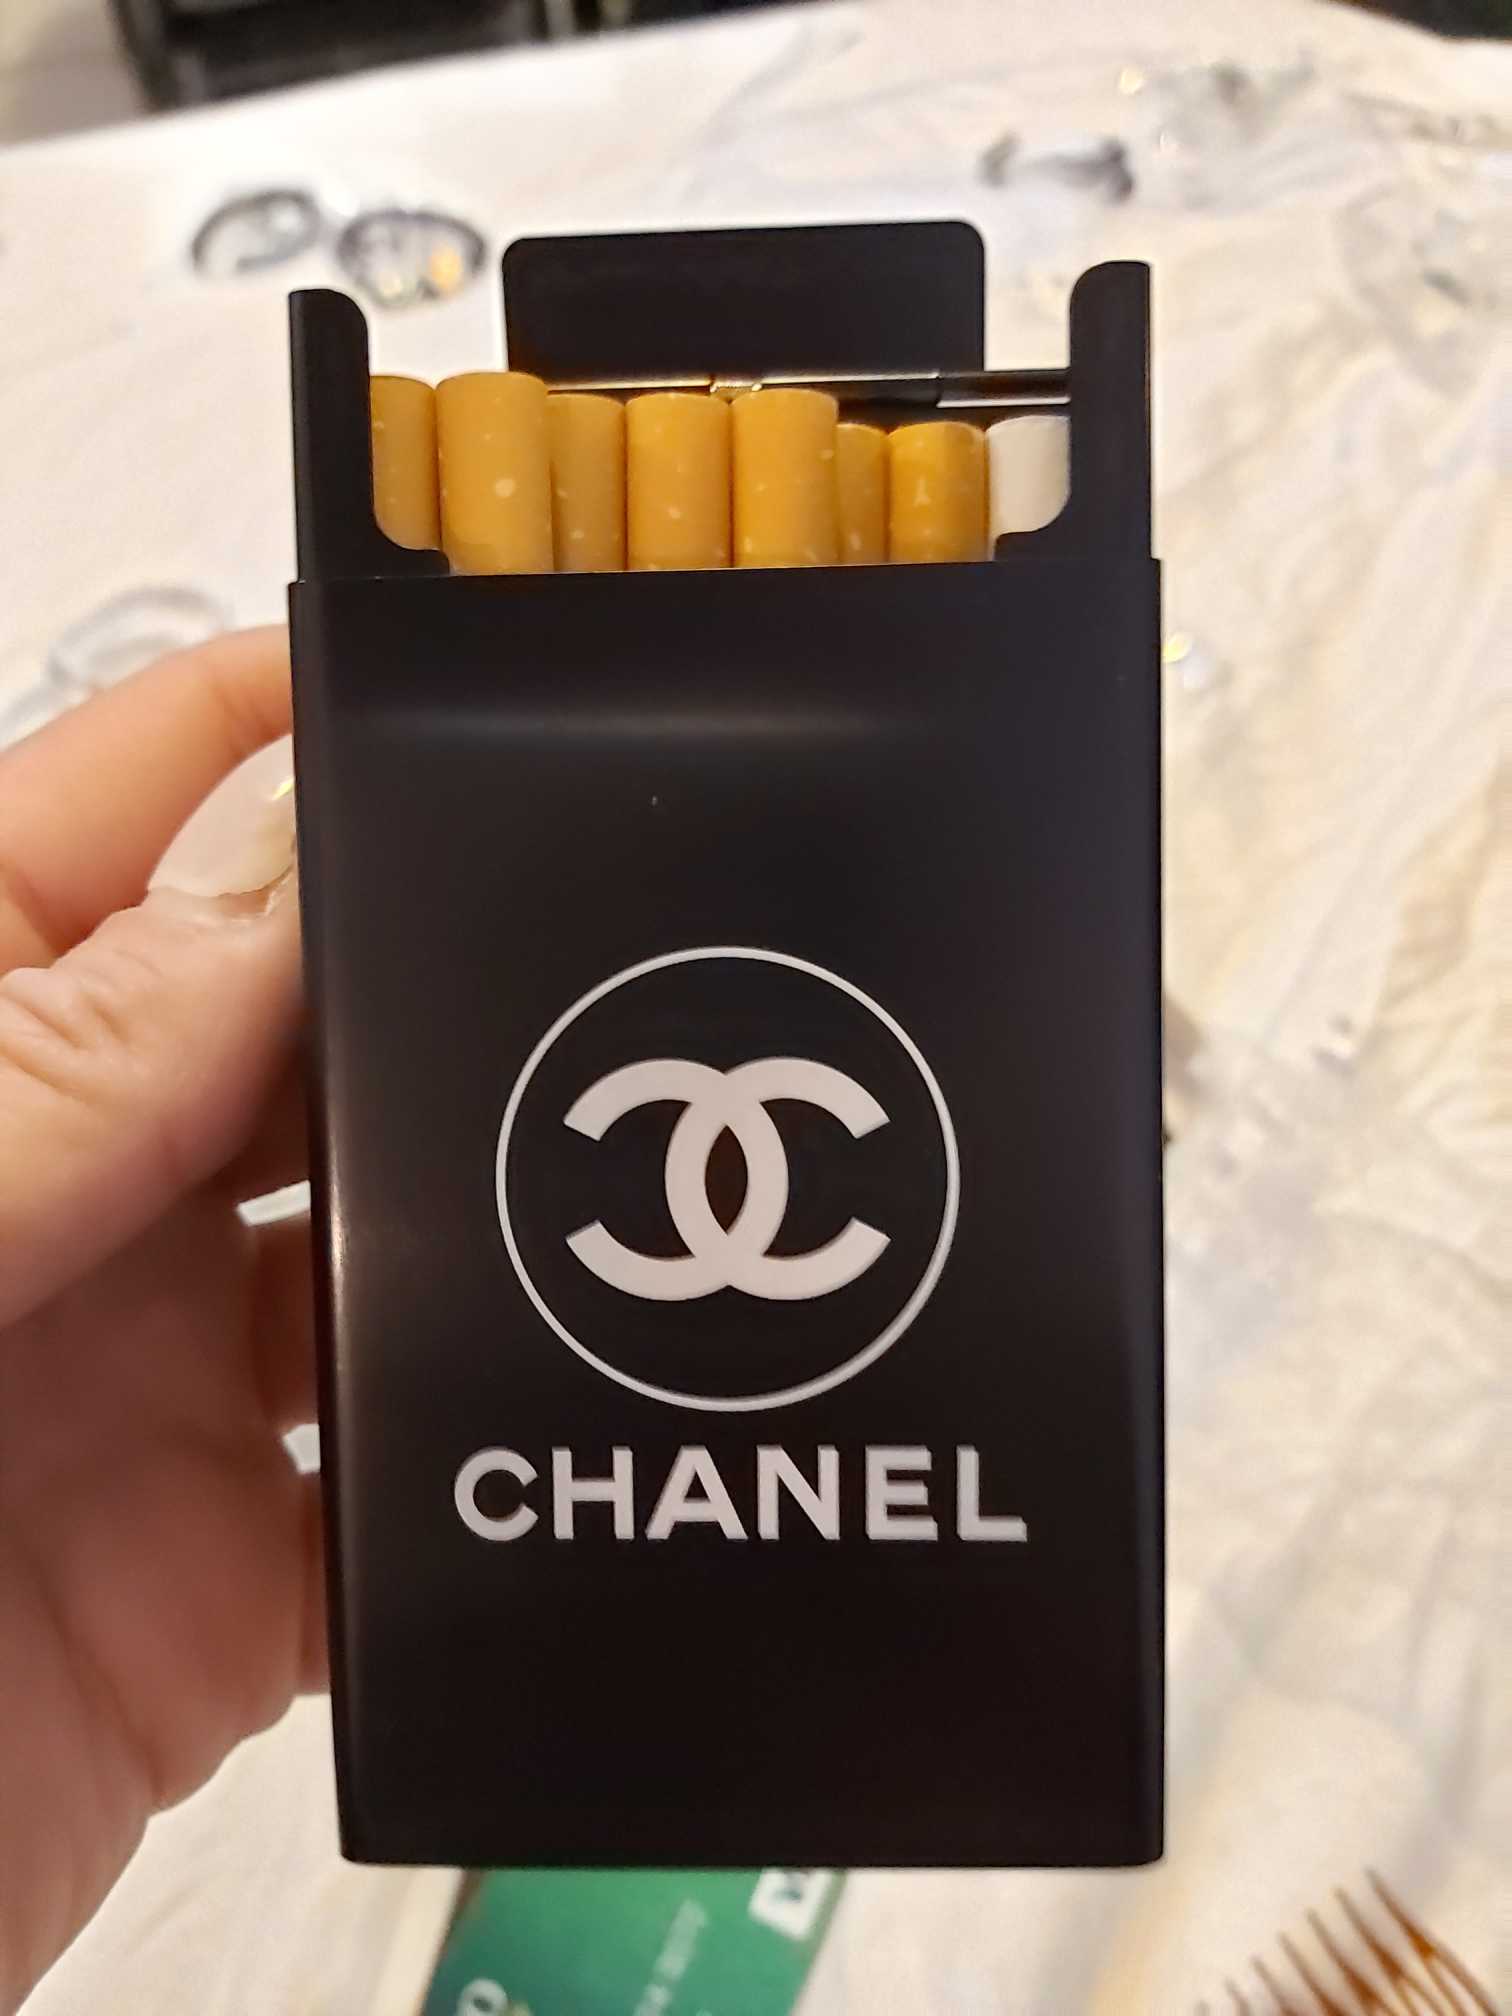 Chanel Cigarette Holder Hotsell, SAVE 34% 